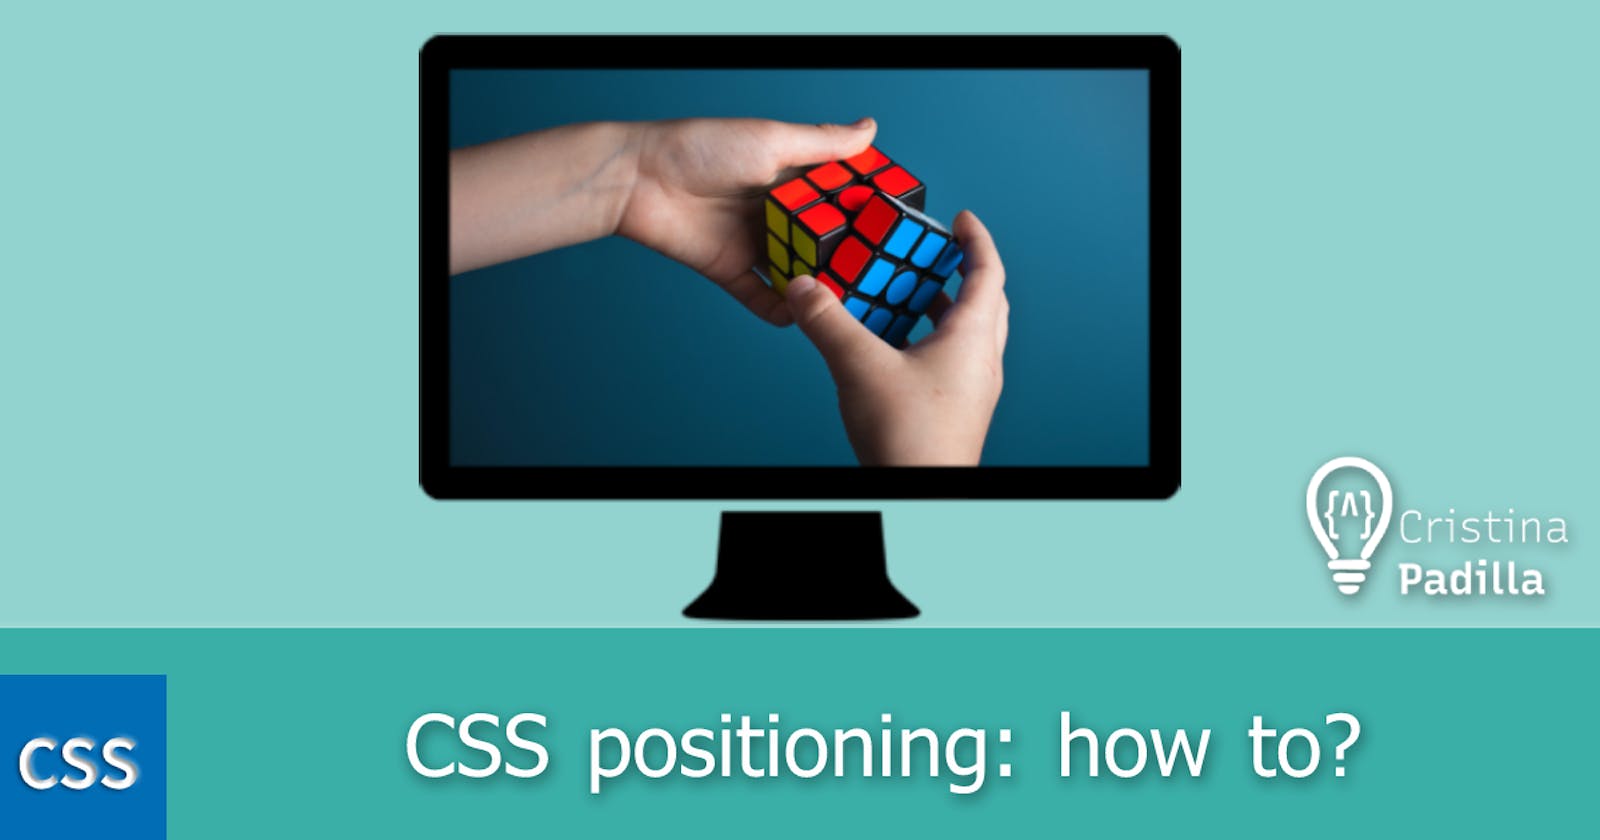 CSS positioning: how to?